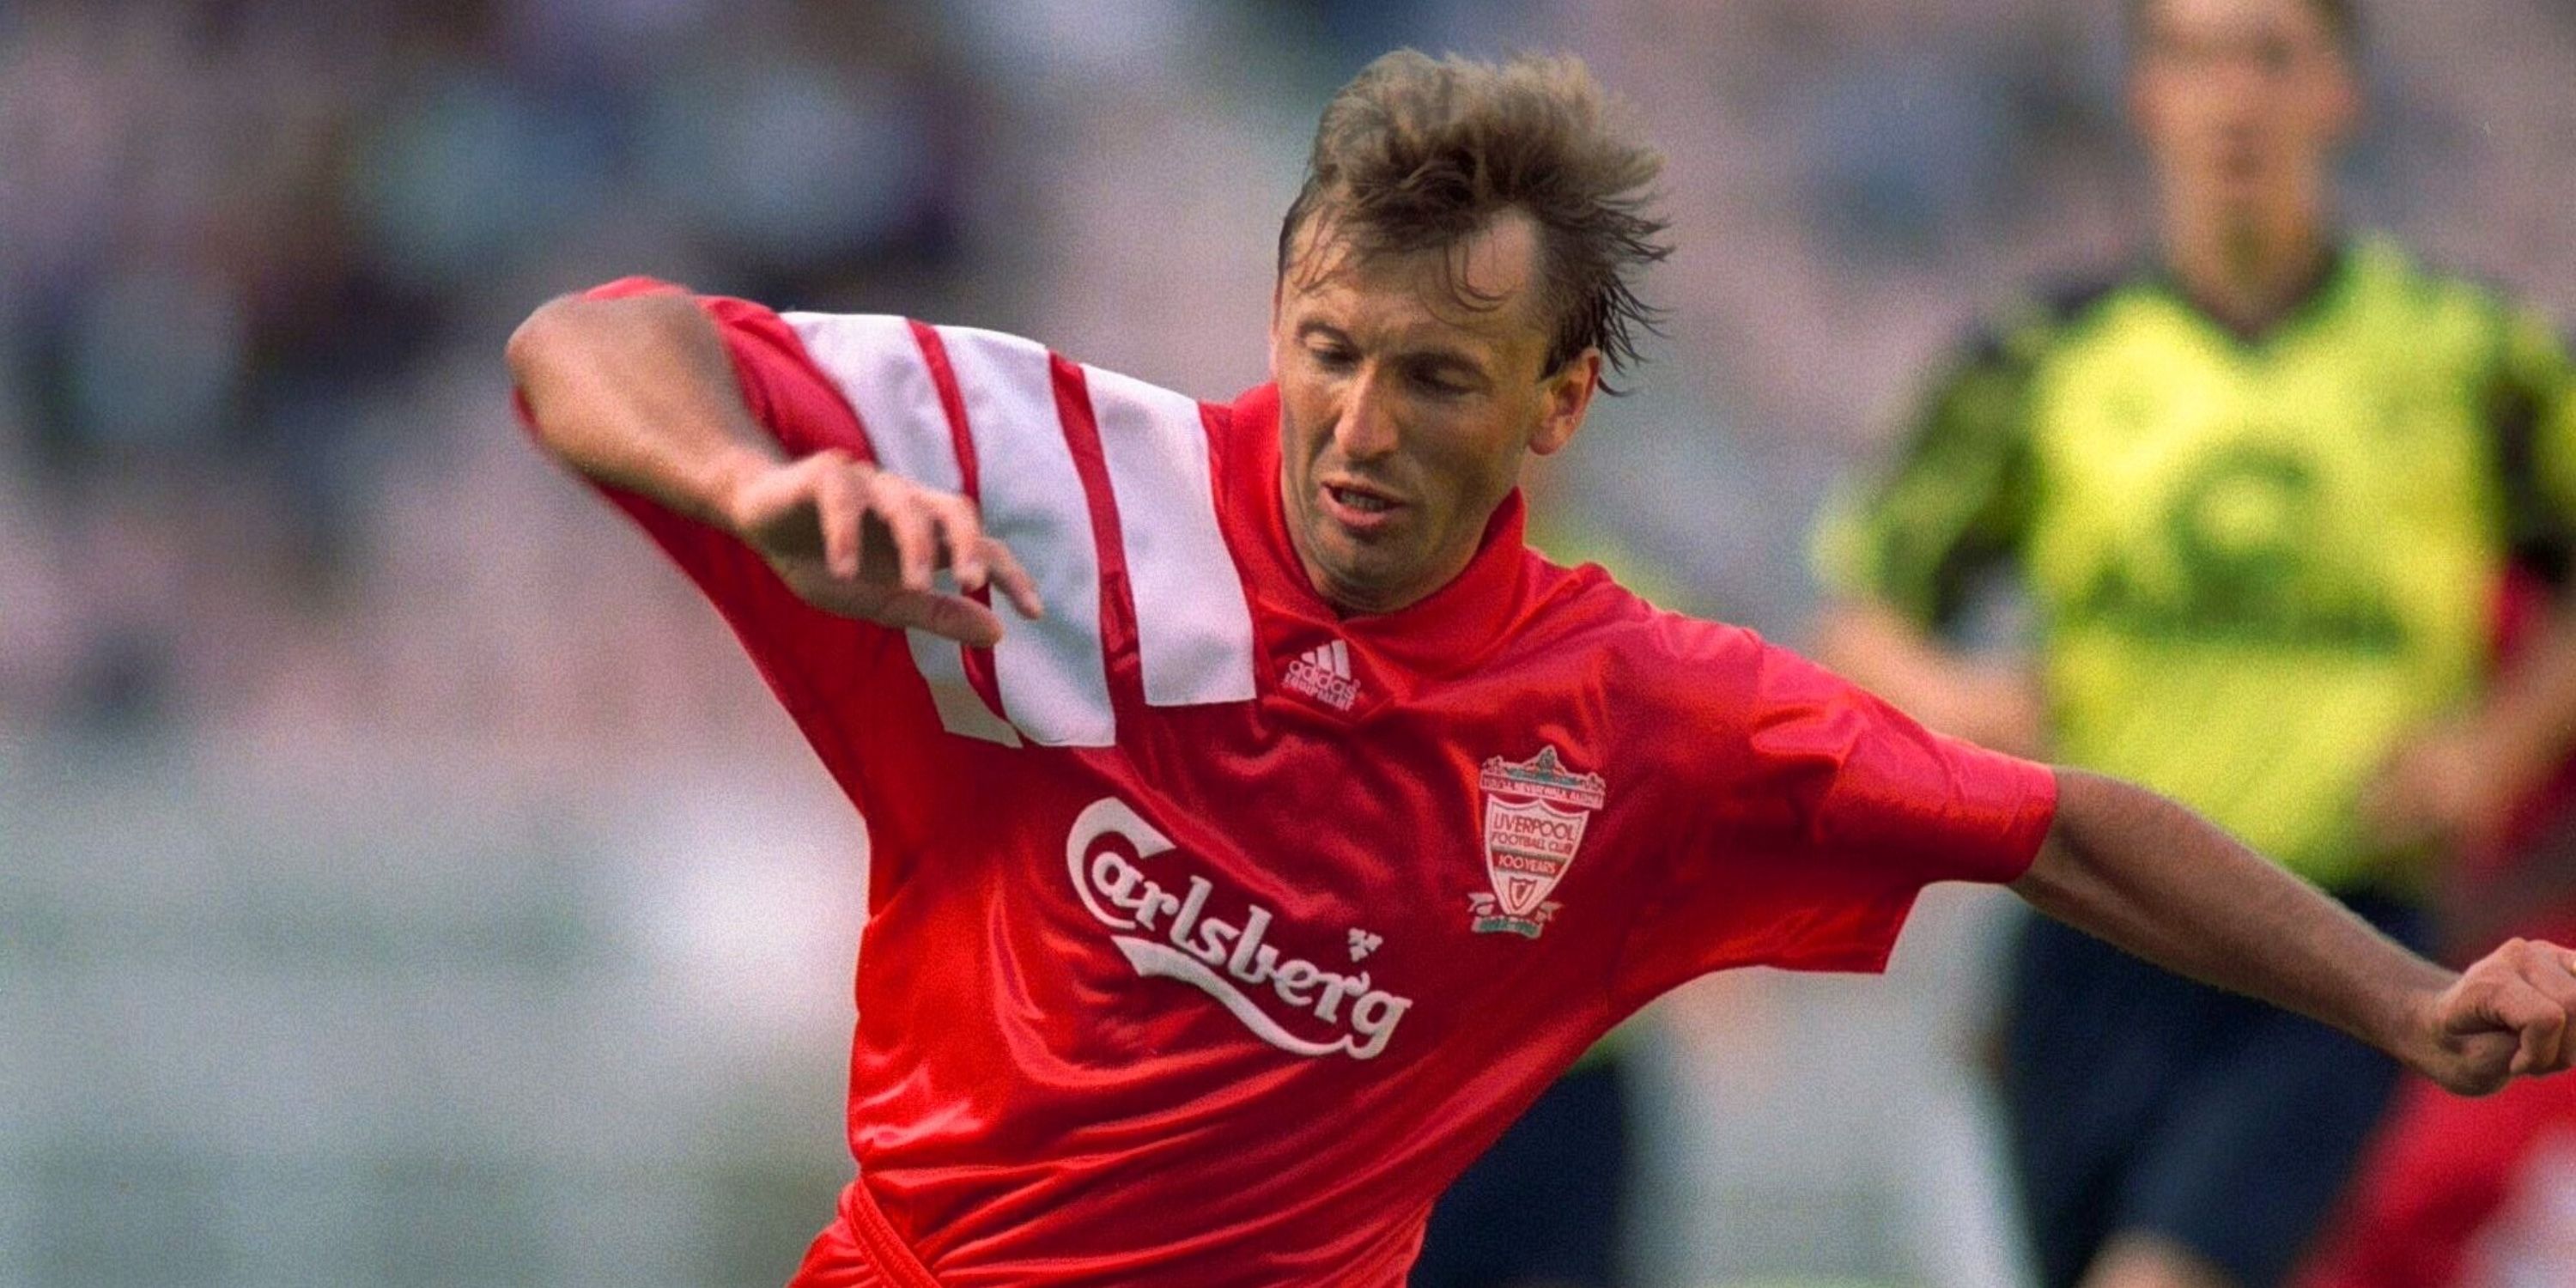 Istvan Kozma in action for Liverpool in the Premier League